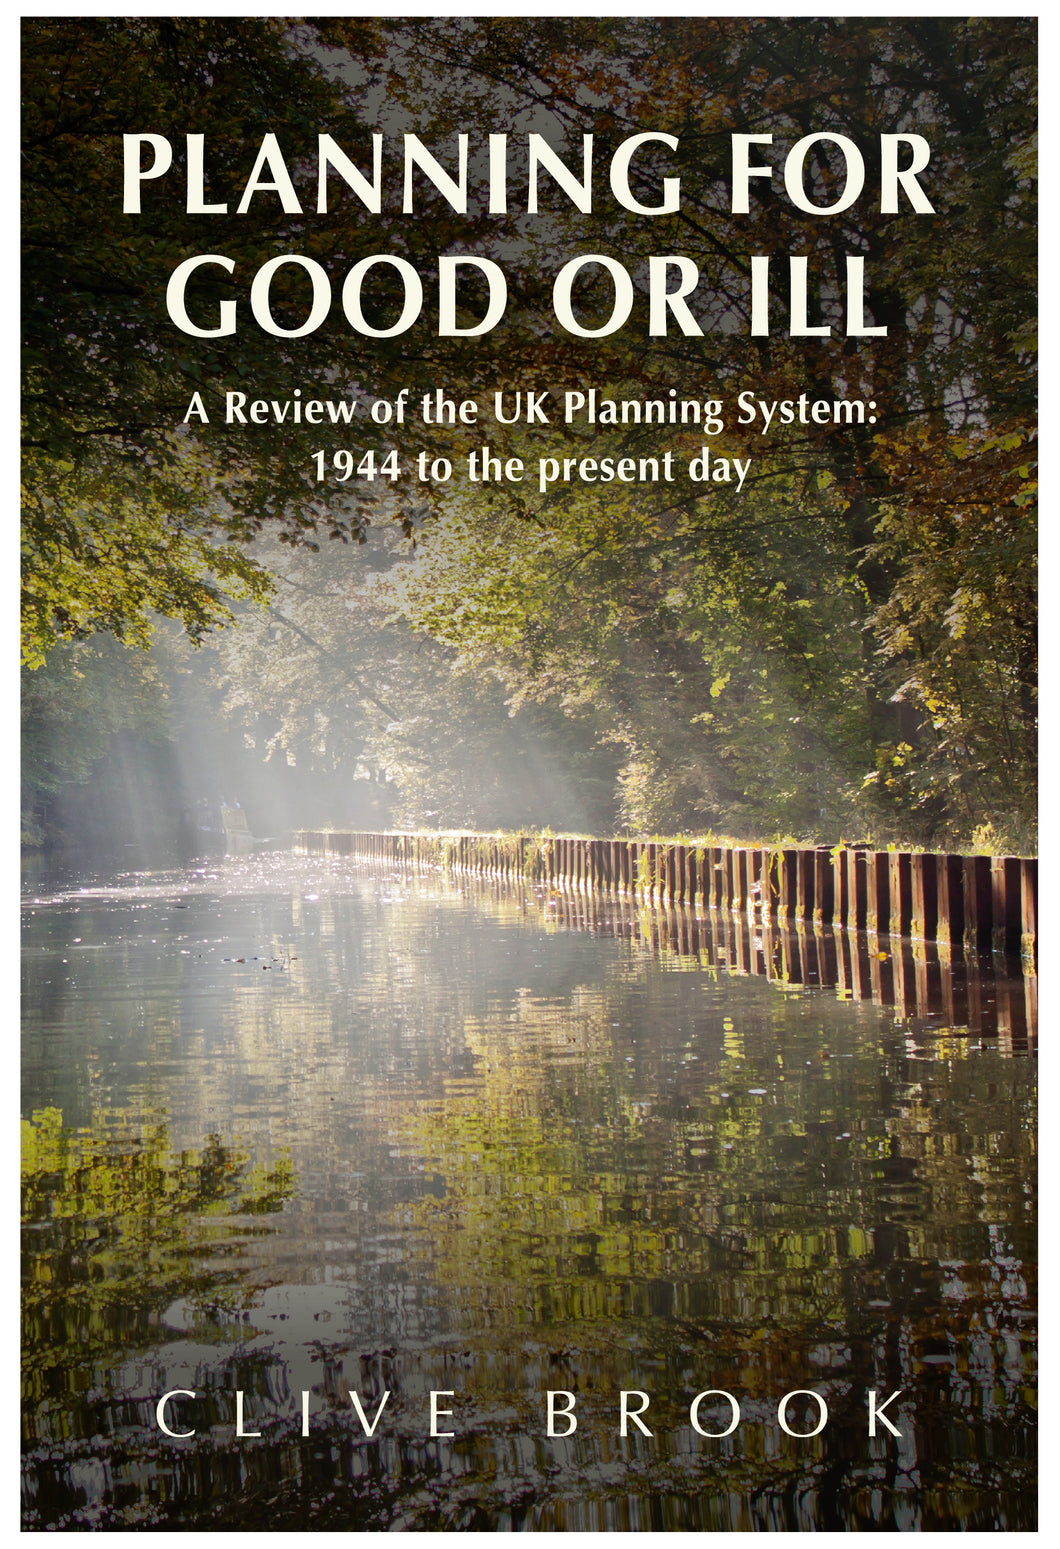 Planning for Good or ill - Clive Brook